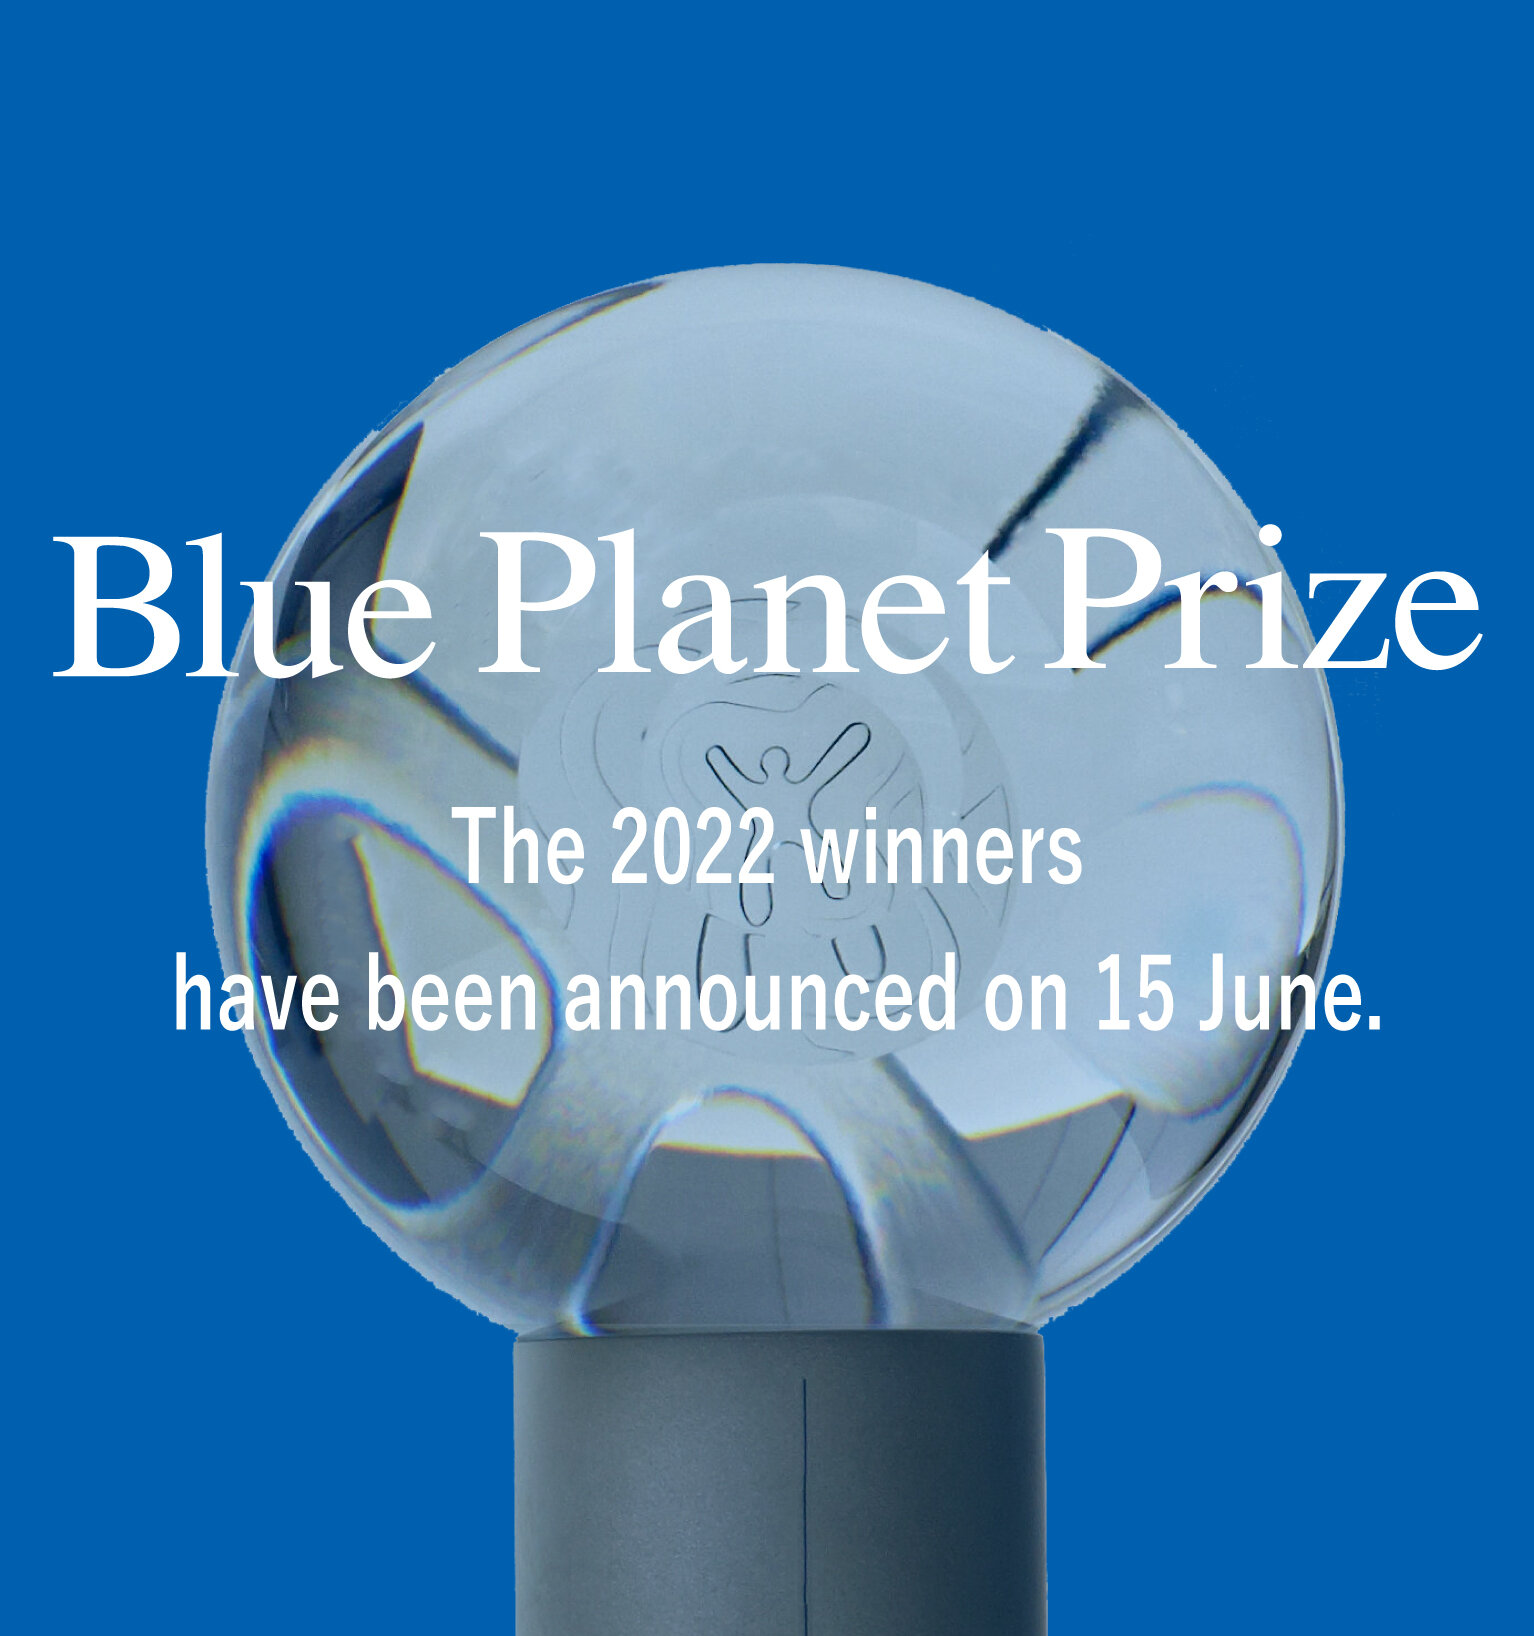 Announcing the 2022 Blue Planet Prize Winners